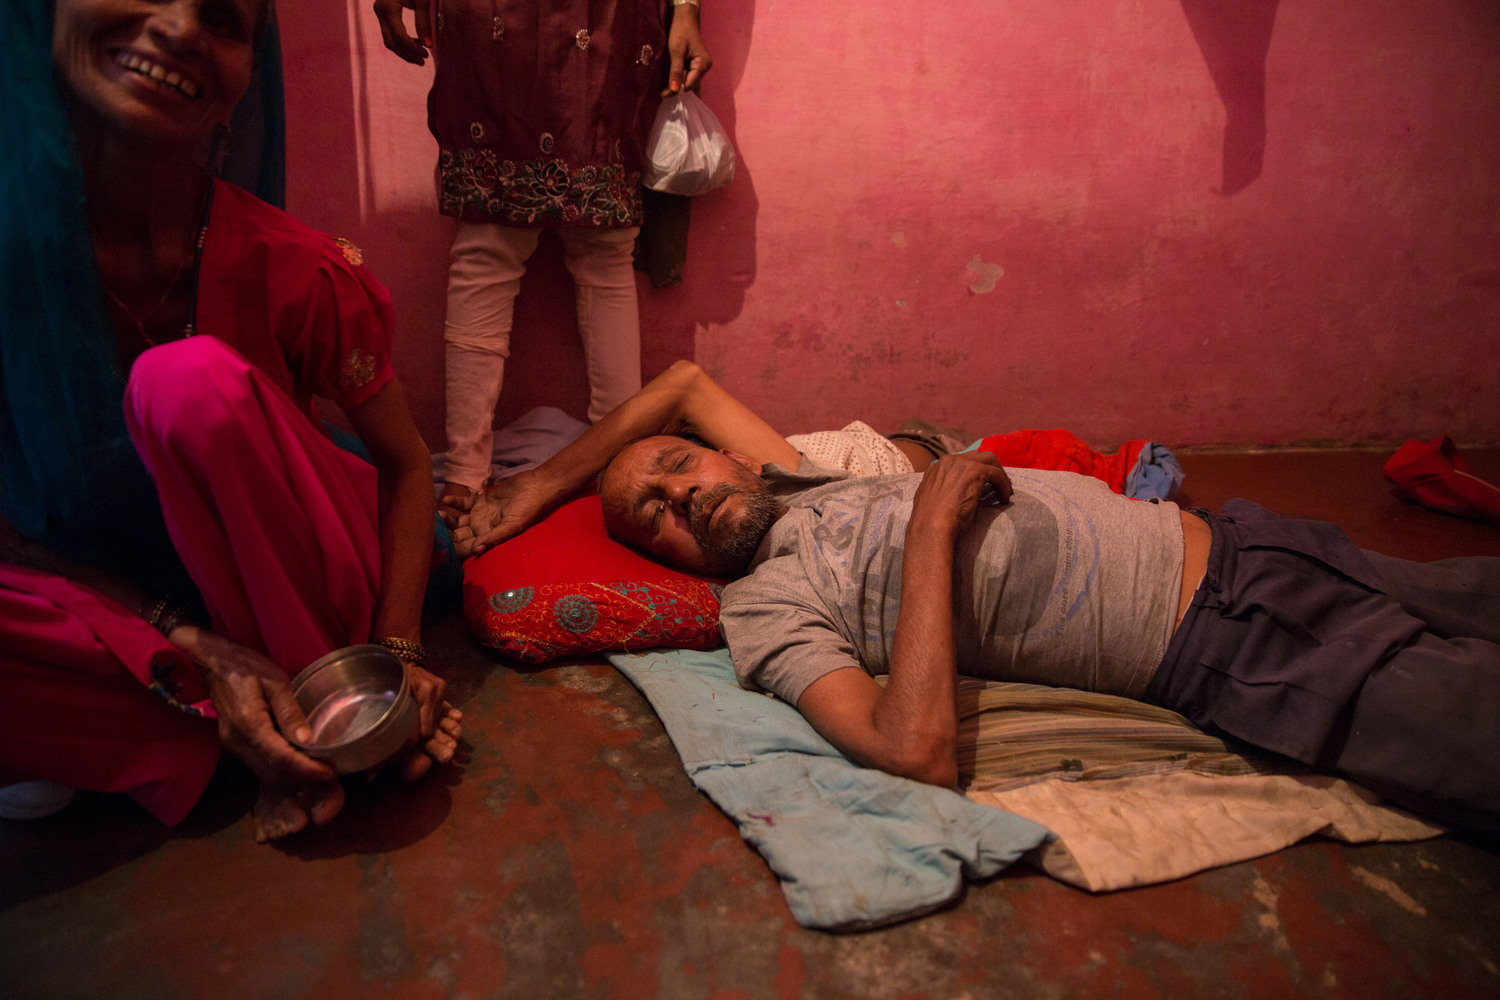  A man sleeps off his hangover in the middle of the afternoon, surrounded by his wife and children. Alcoholism is a common problem in the neighborhood. 